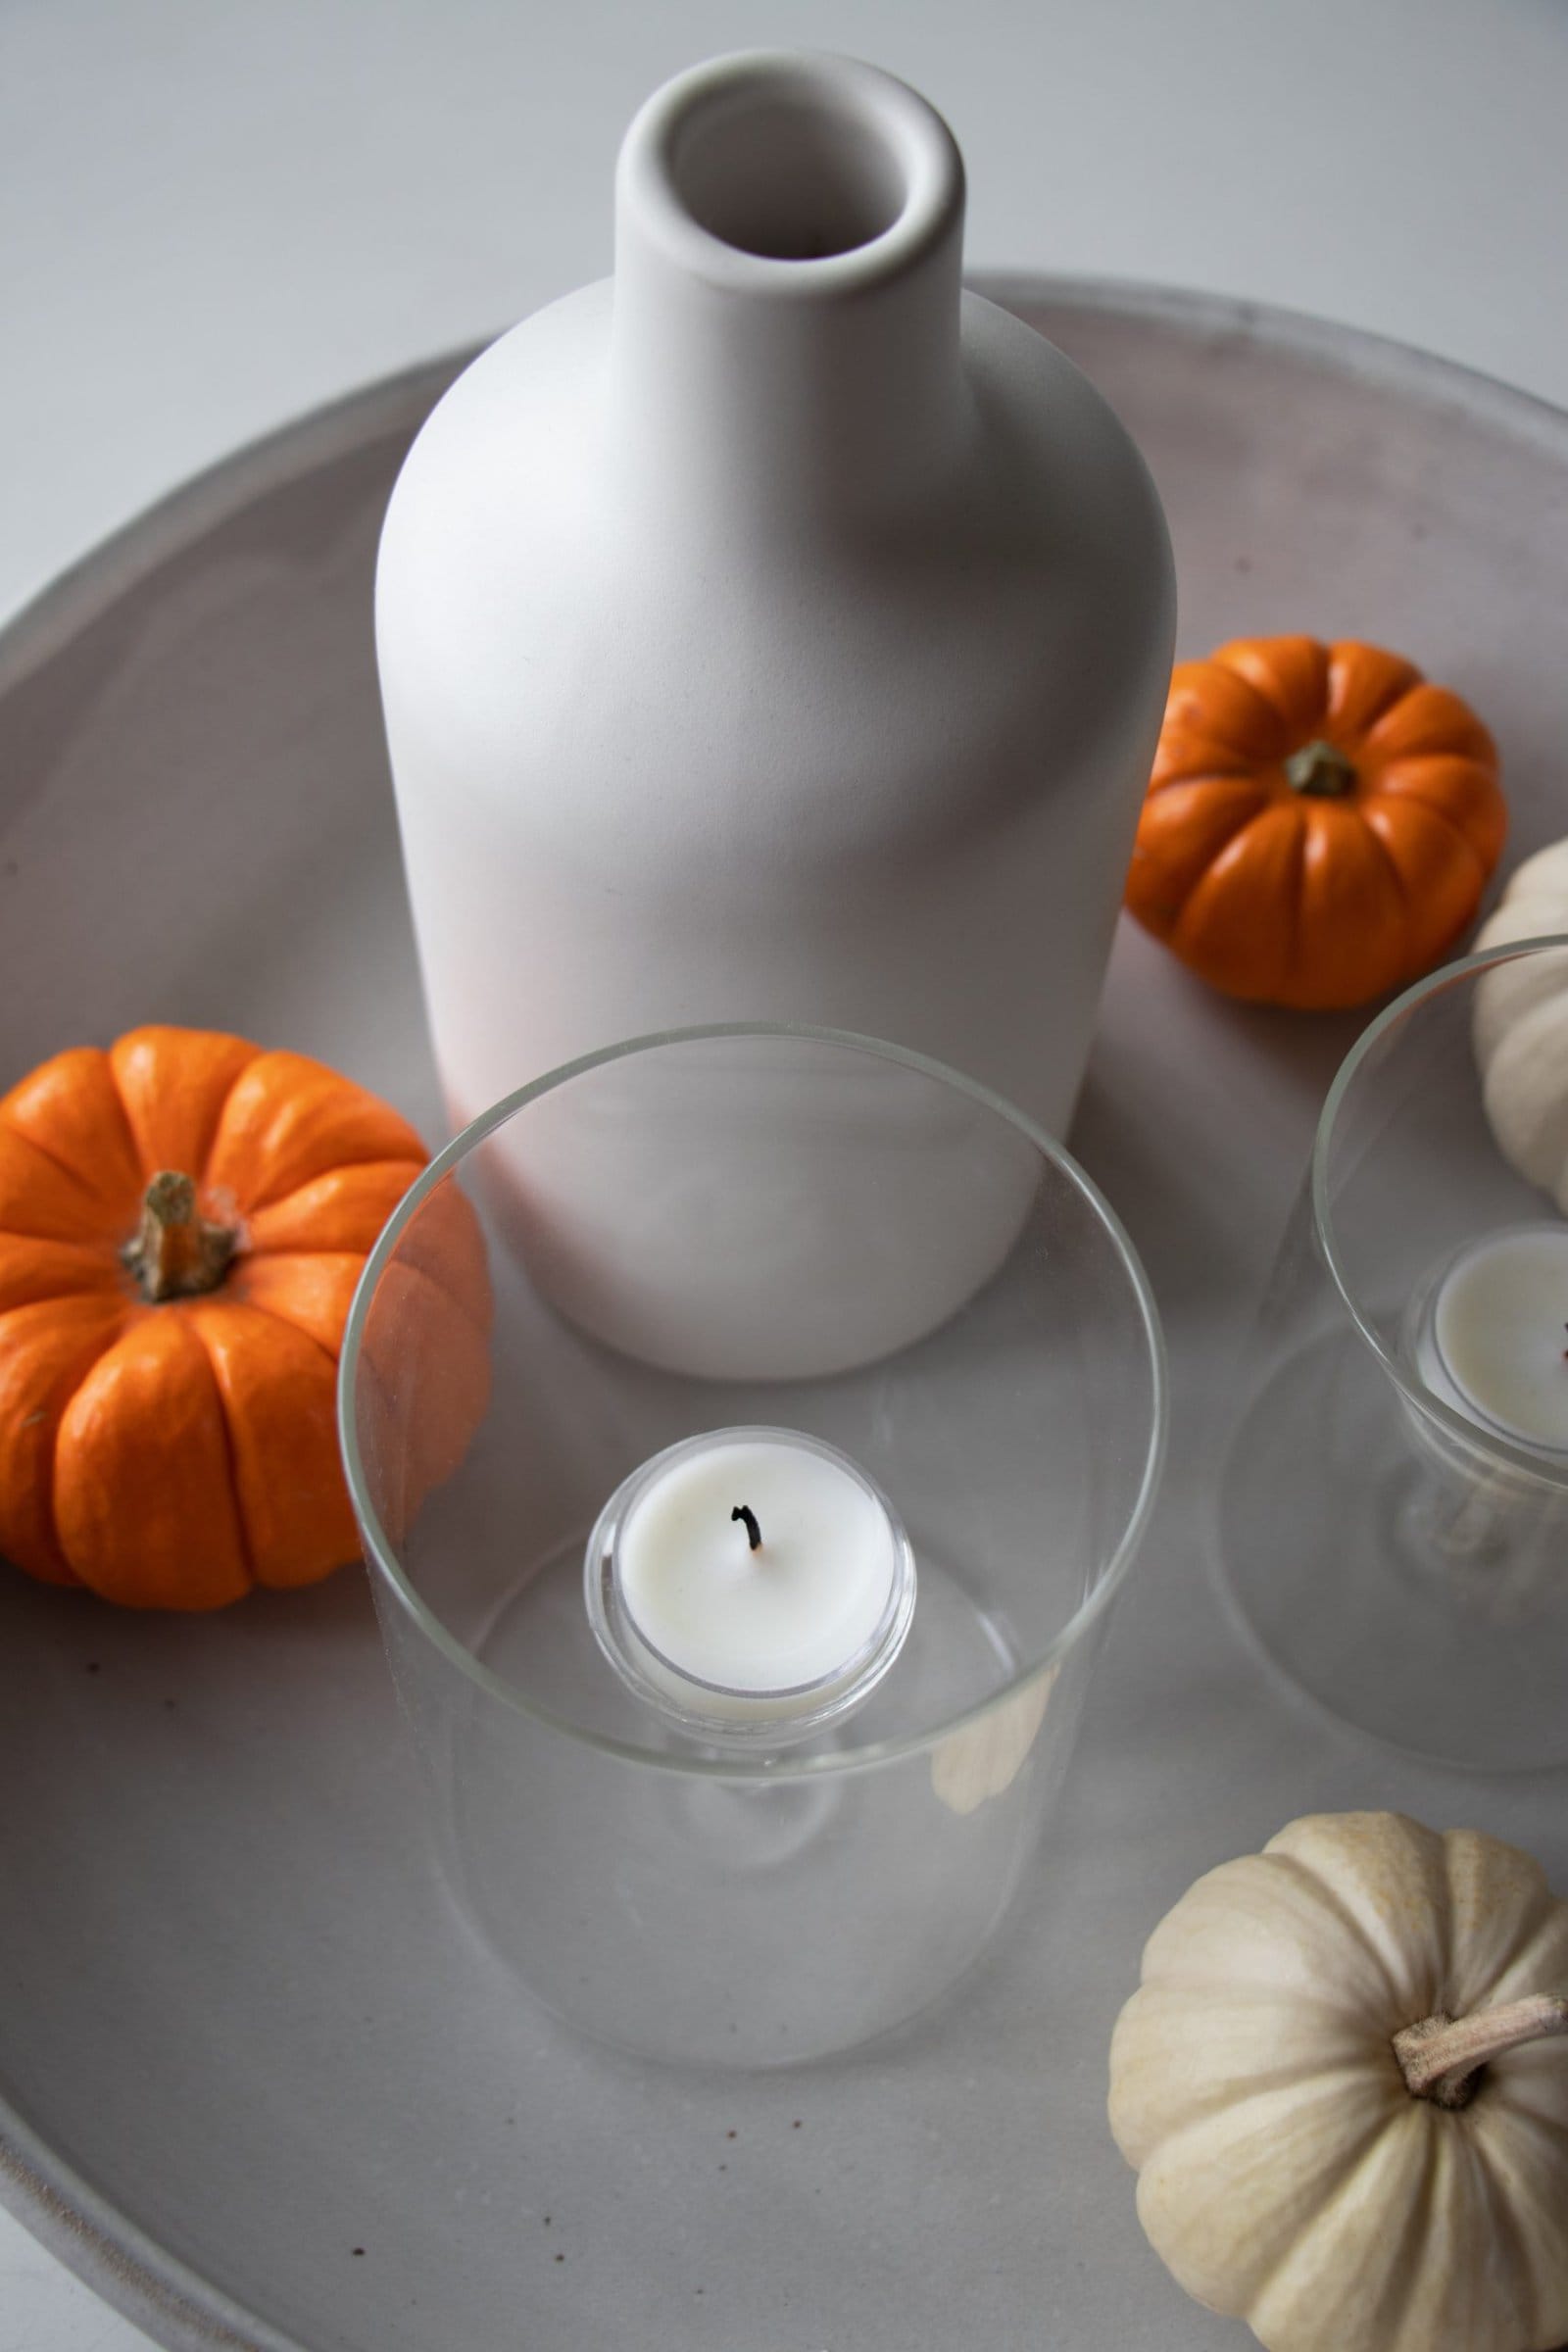  Fall Decor Doesnt Have to Be Flashy scaled